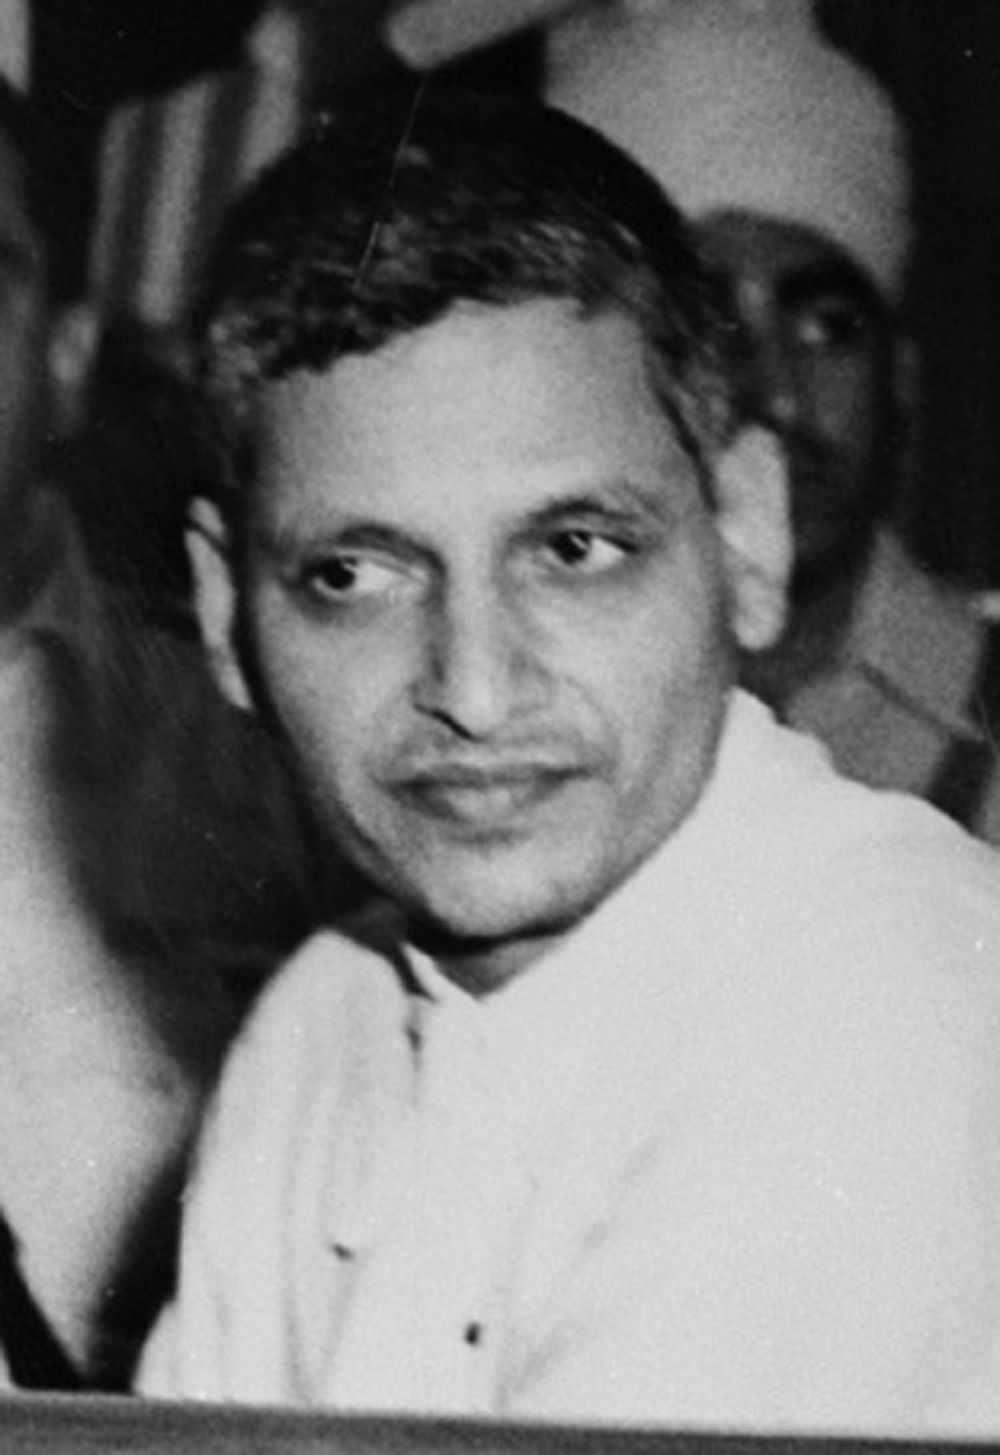 There are several Indians who want to observe 15 November to mark Nathuram Godse’s ‘sacrifice’.